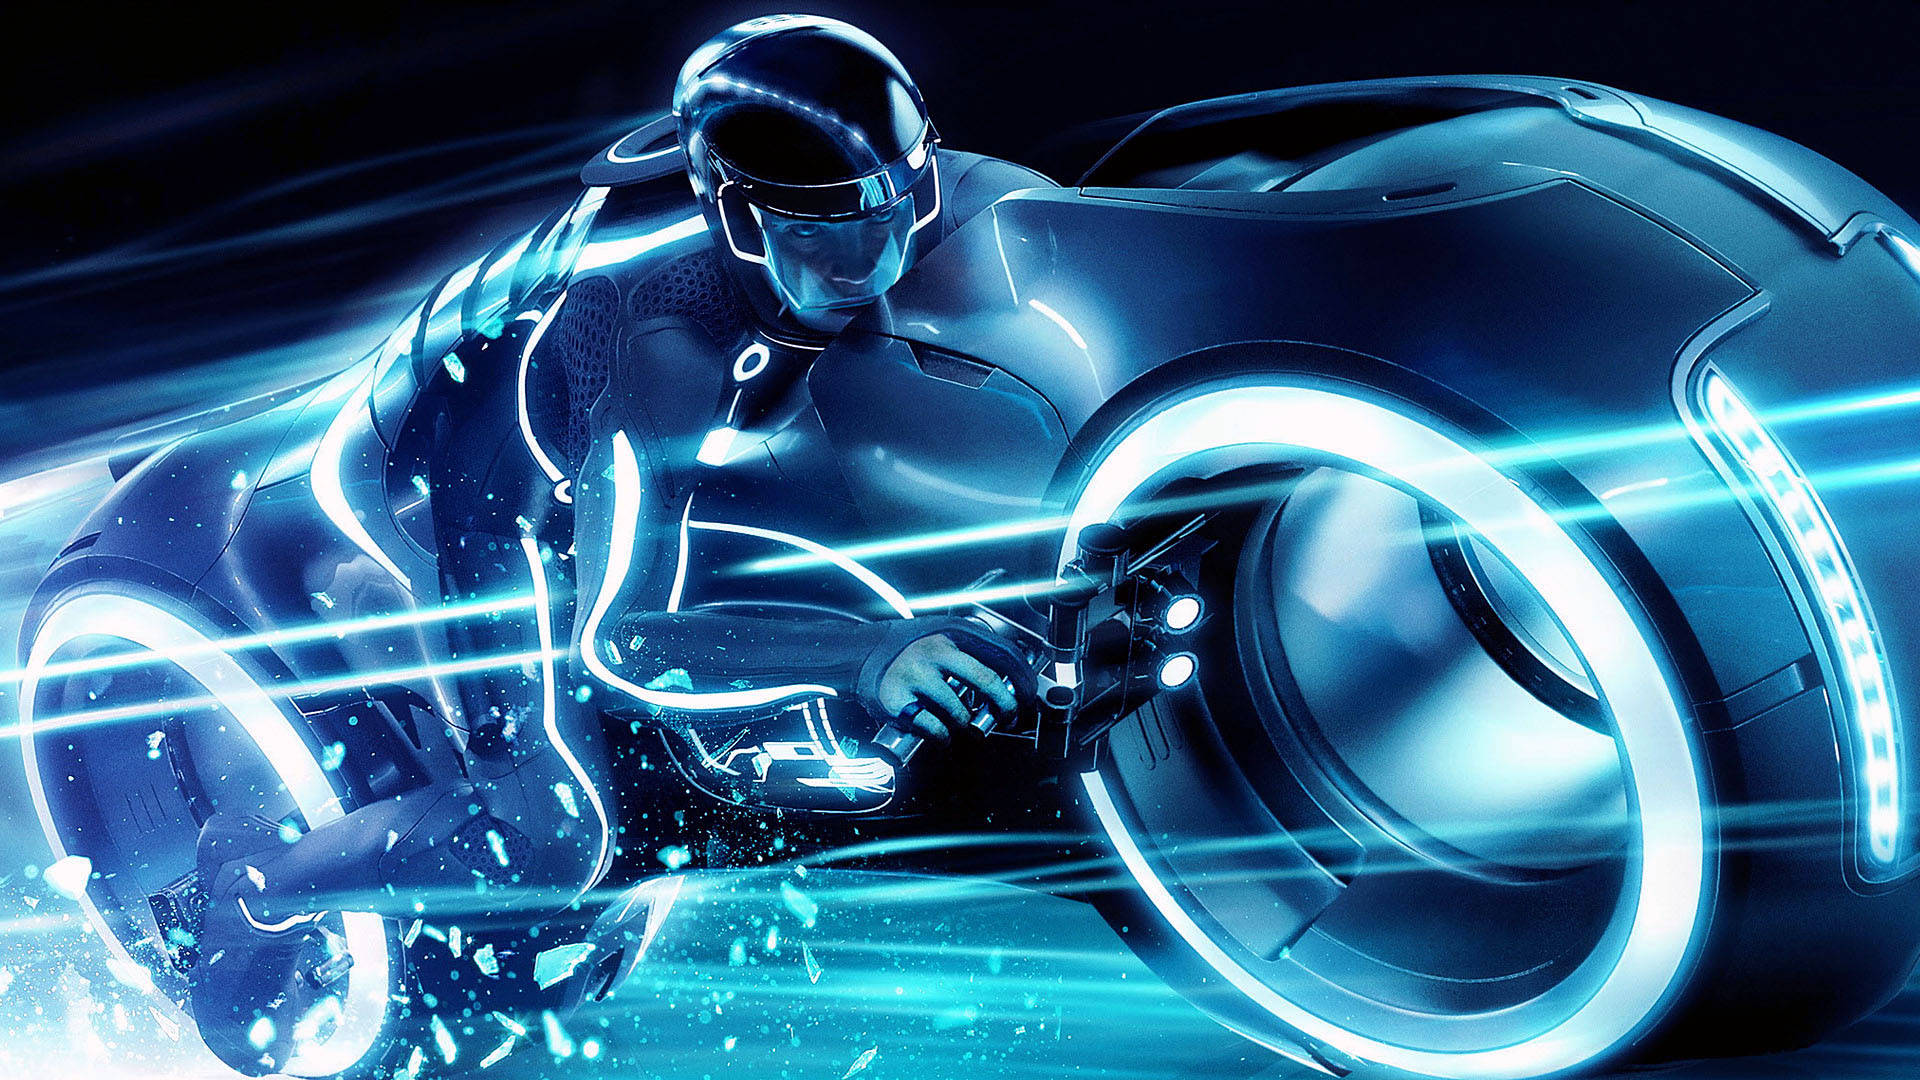 A Man Riding A Motorcycle With A Blue Light Wallpaper